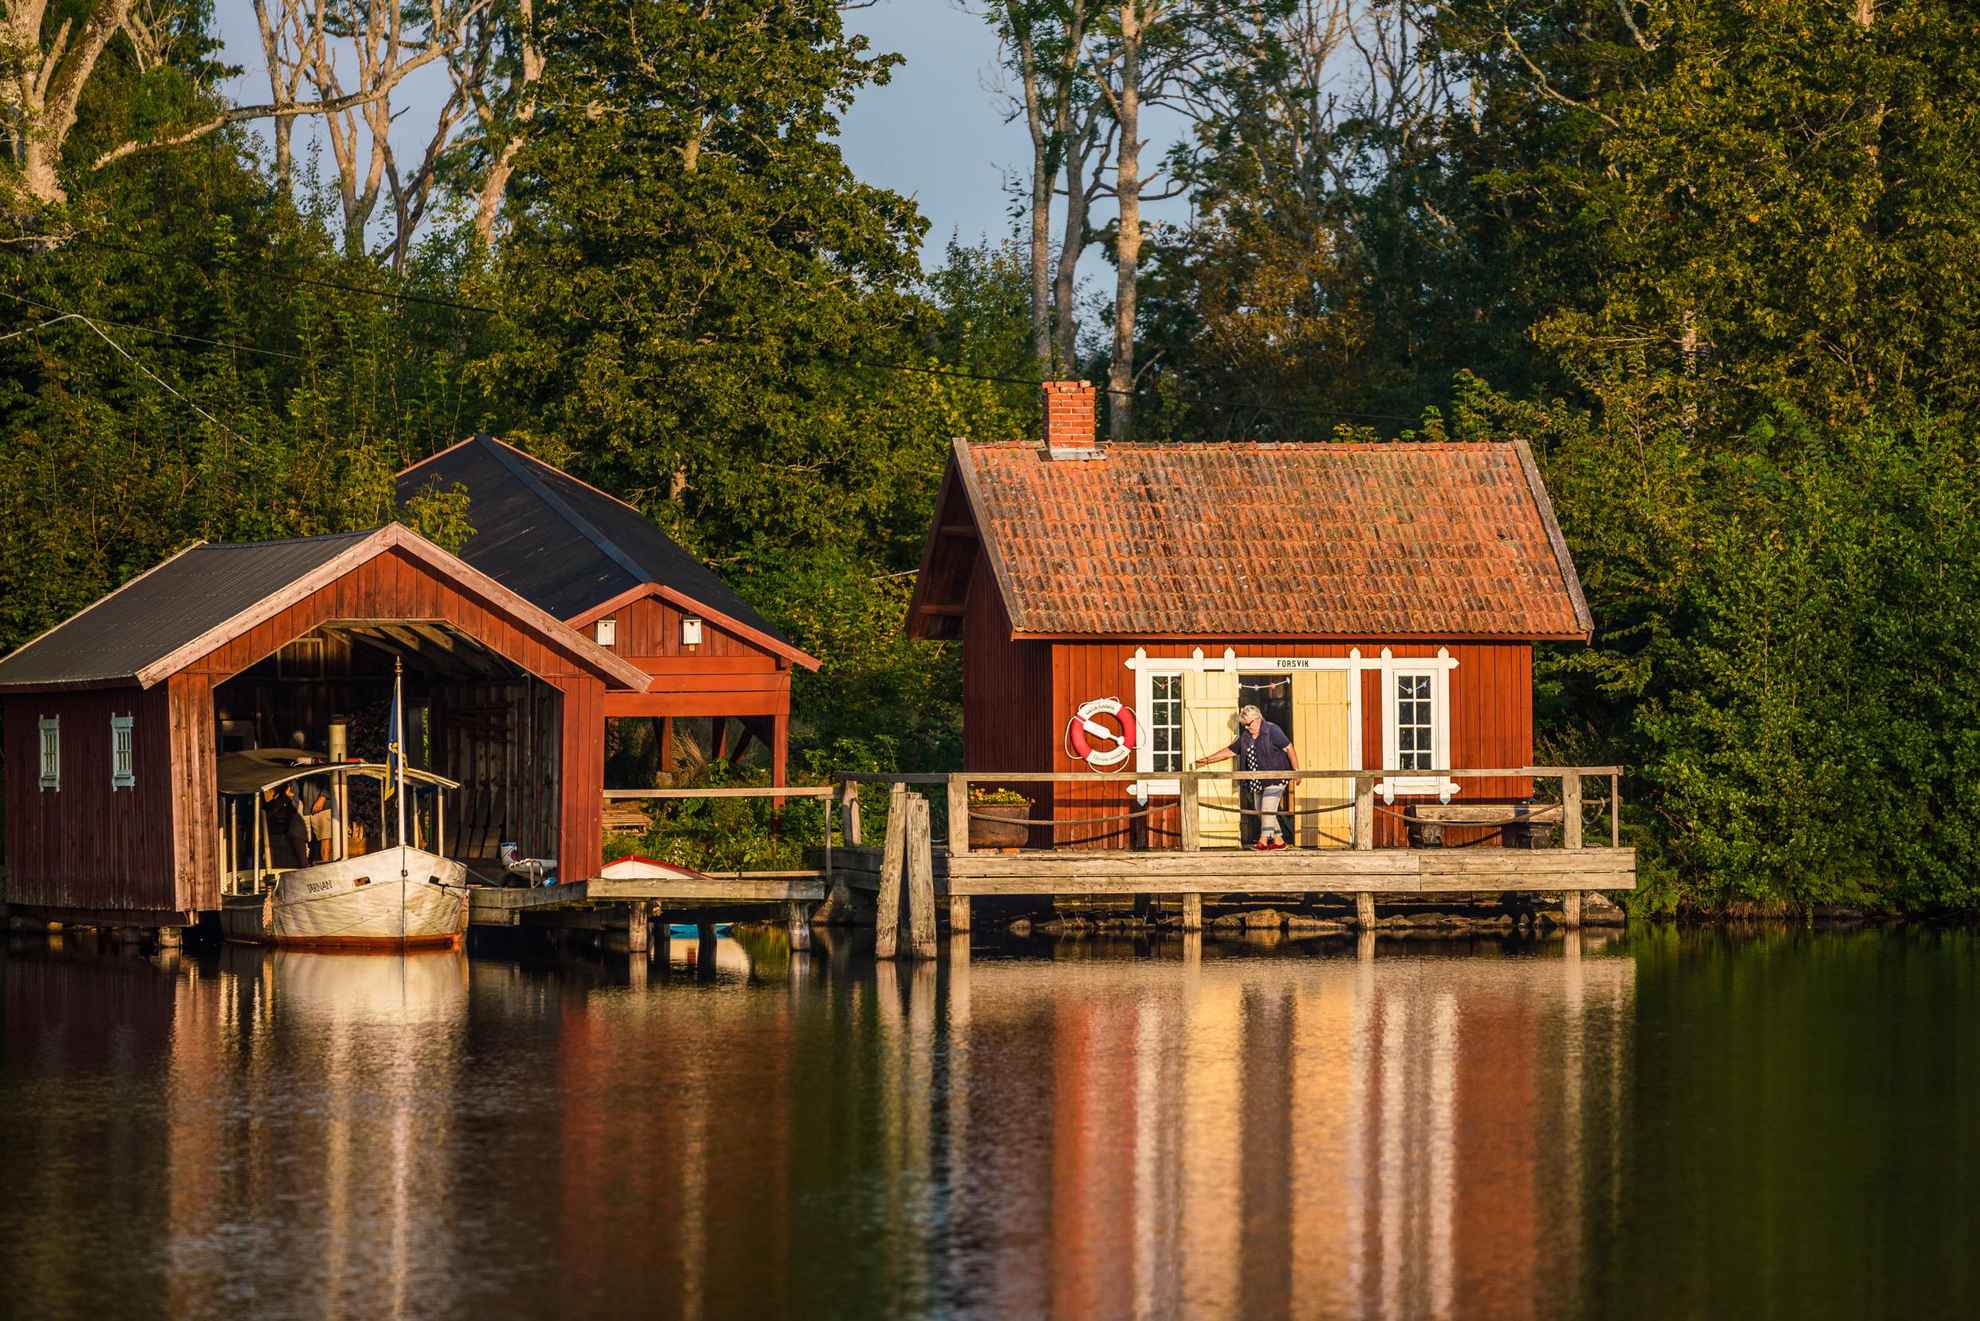 A woman is exiting a red wooden house that lies by the water. Next to the house is a boat house.